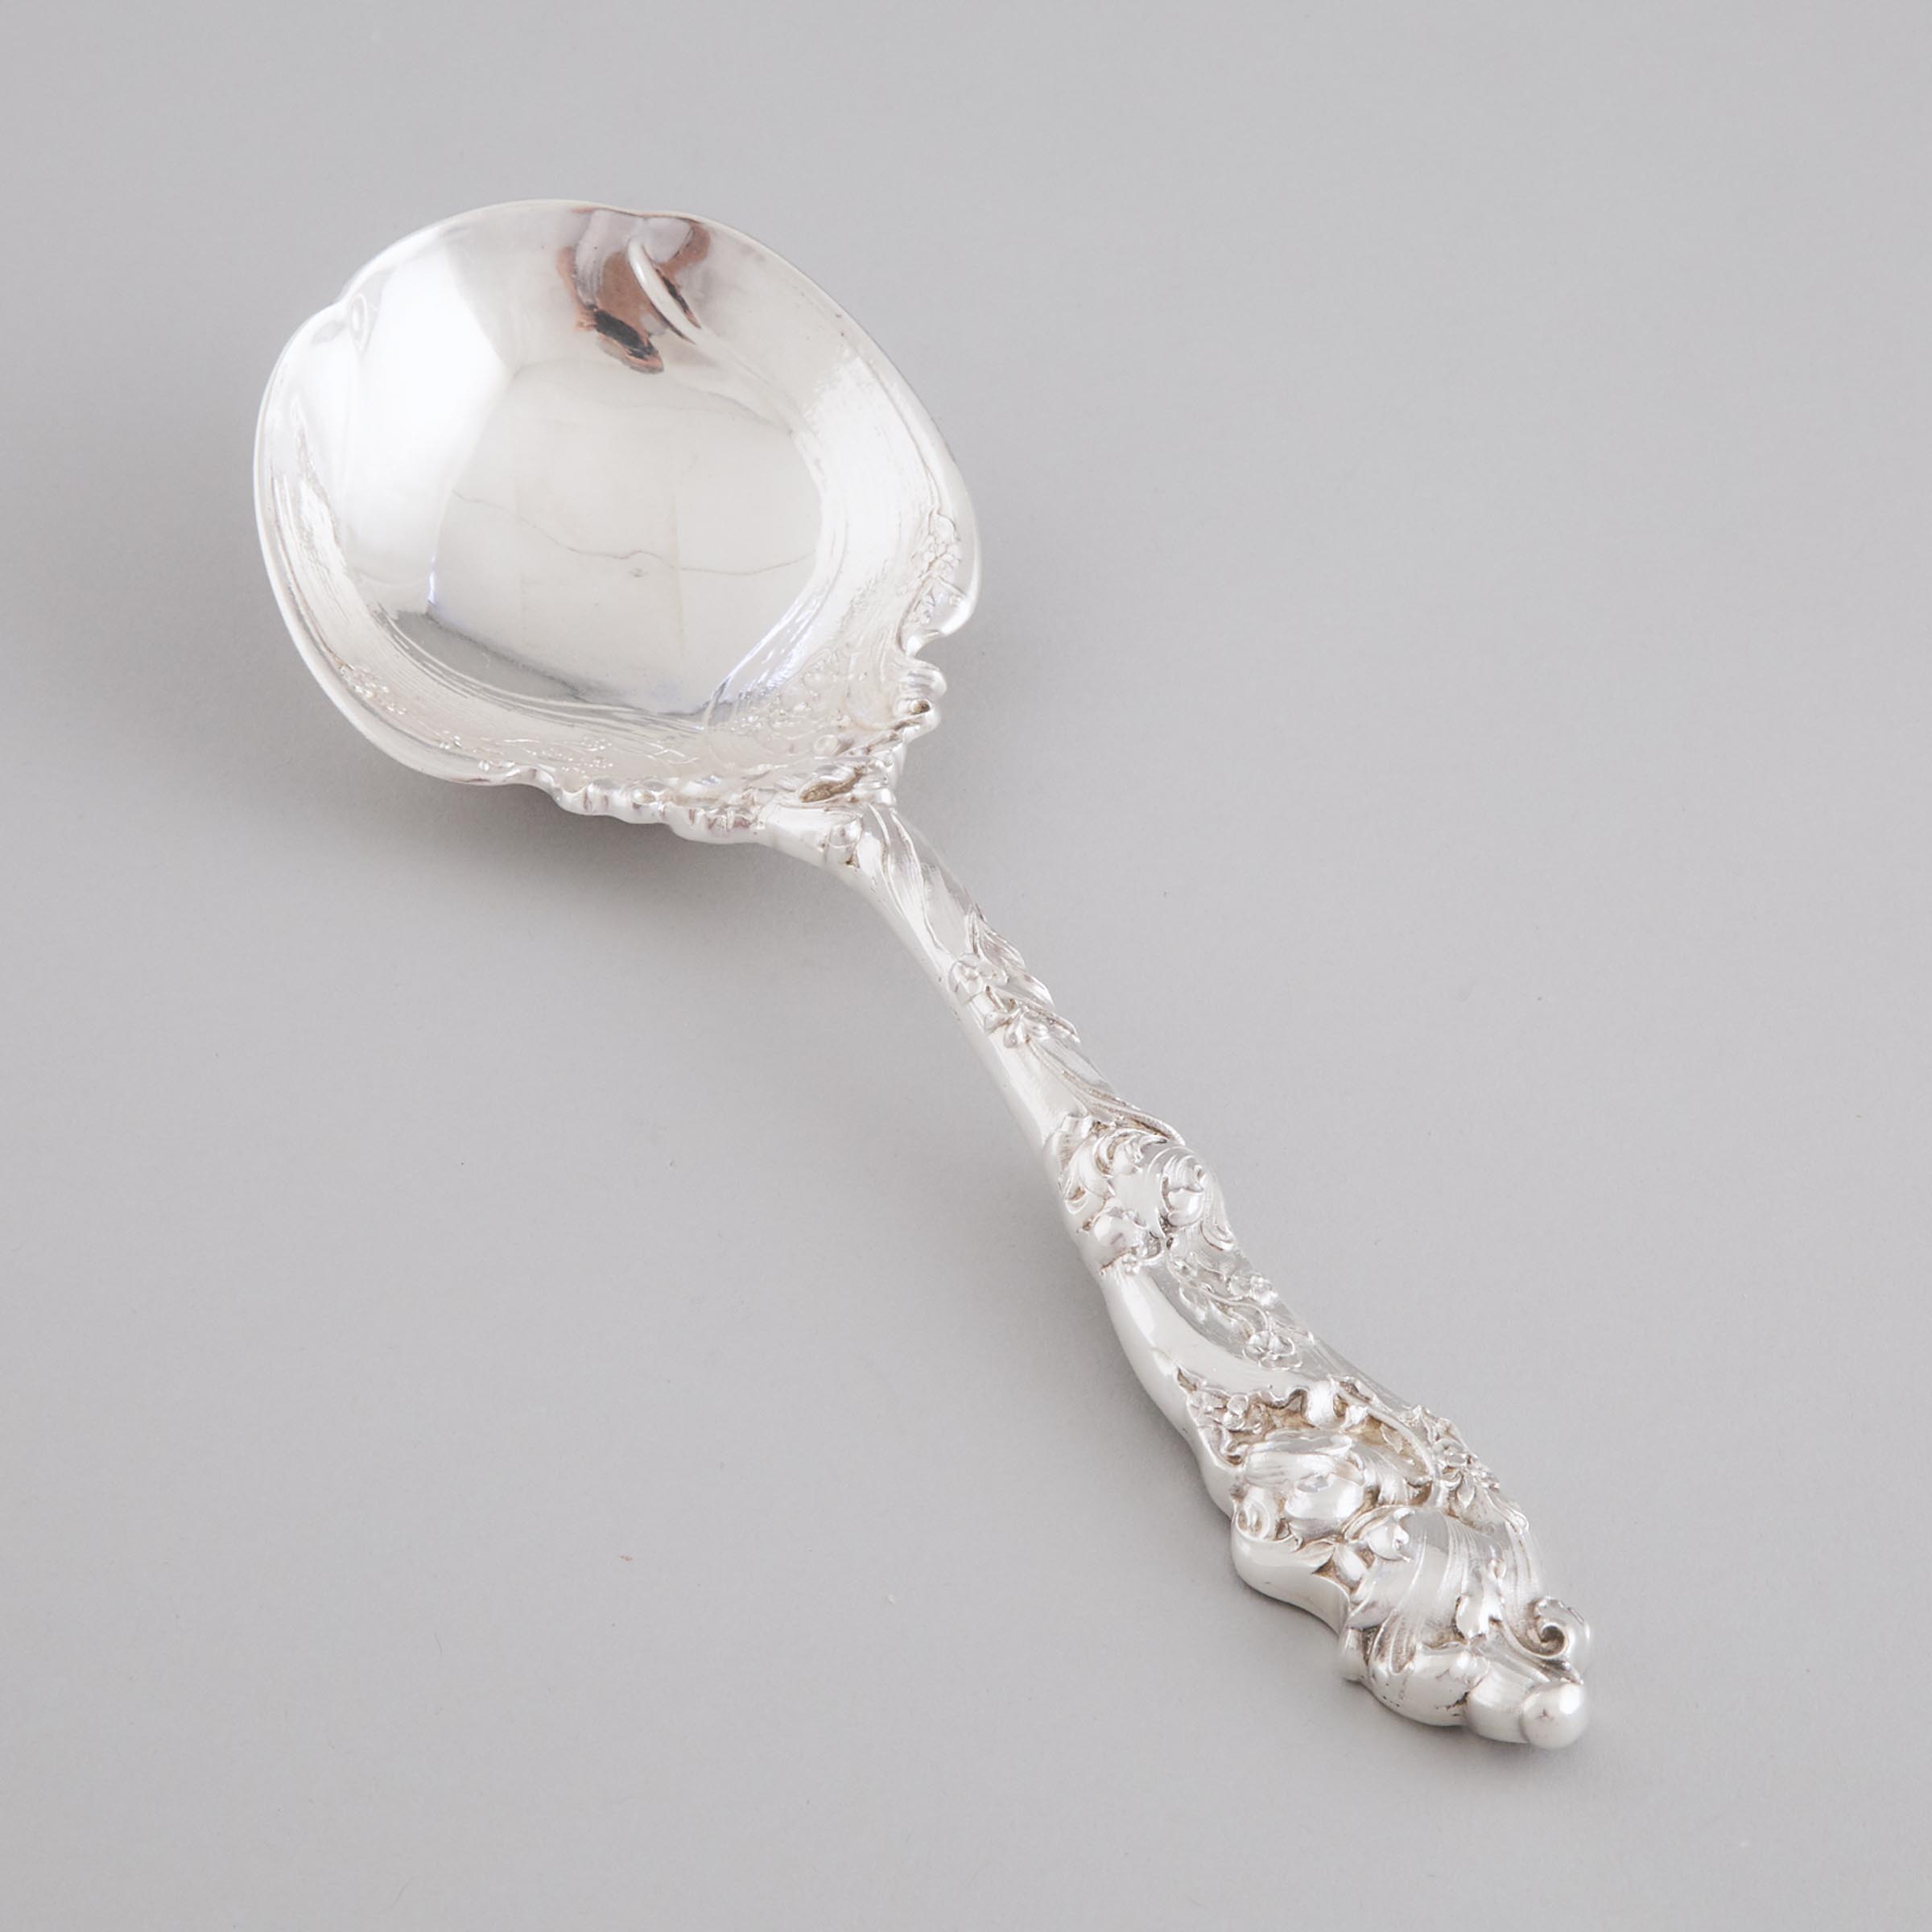 American Silver 'H158' Pattern Serving Spoon, Gorham Mfg. Co., Providence, R.I., c.1900